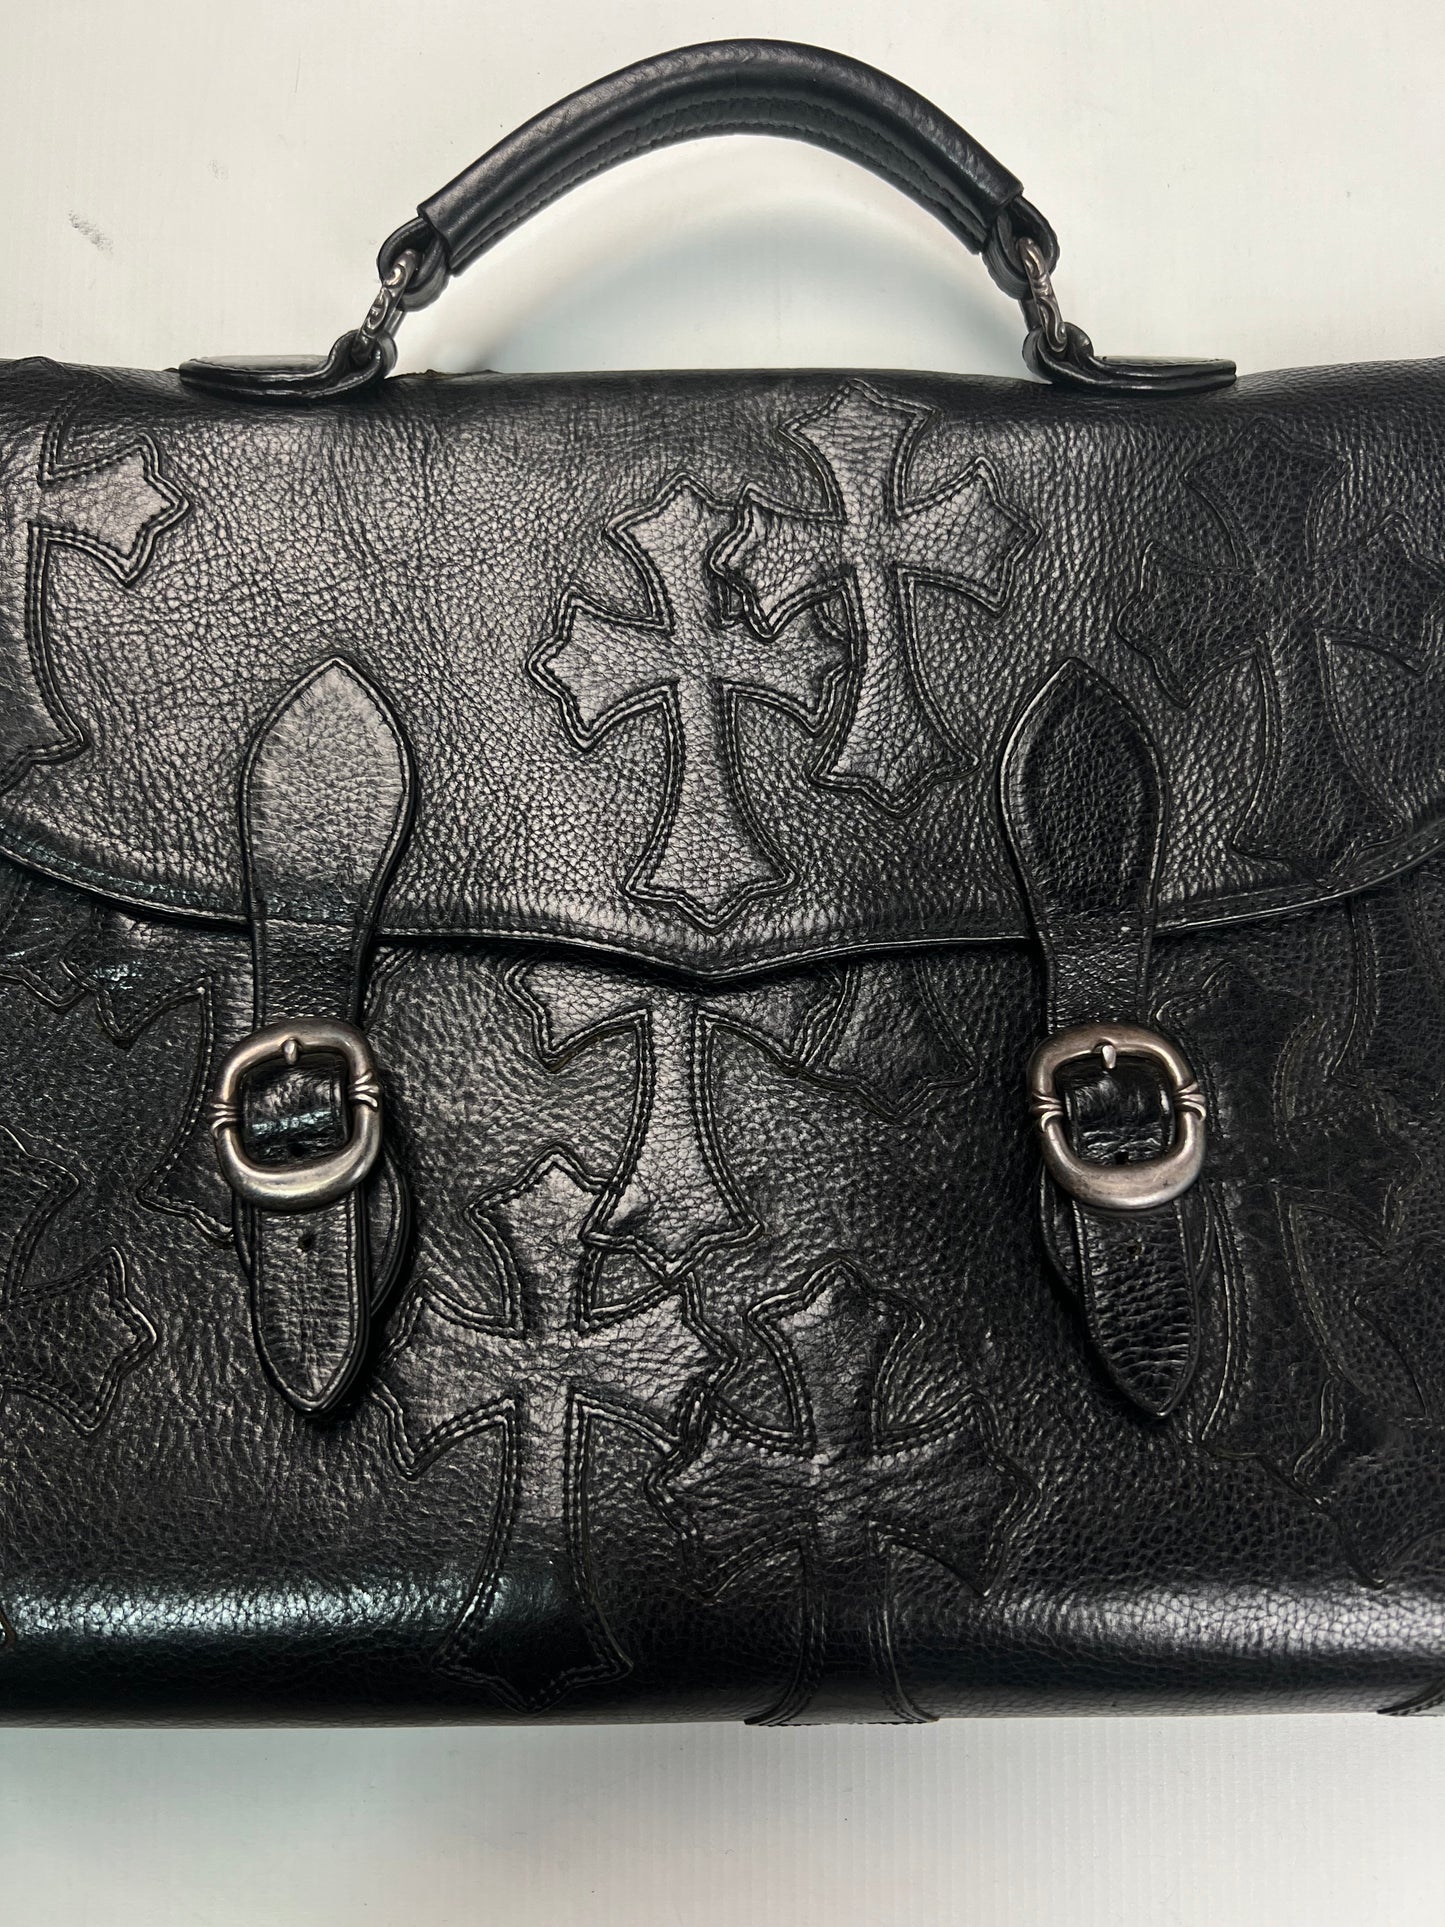 CHROME HEARTS CROSS PATCHED GOTHIC BRIEFCASE BAG SZ:OS